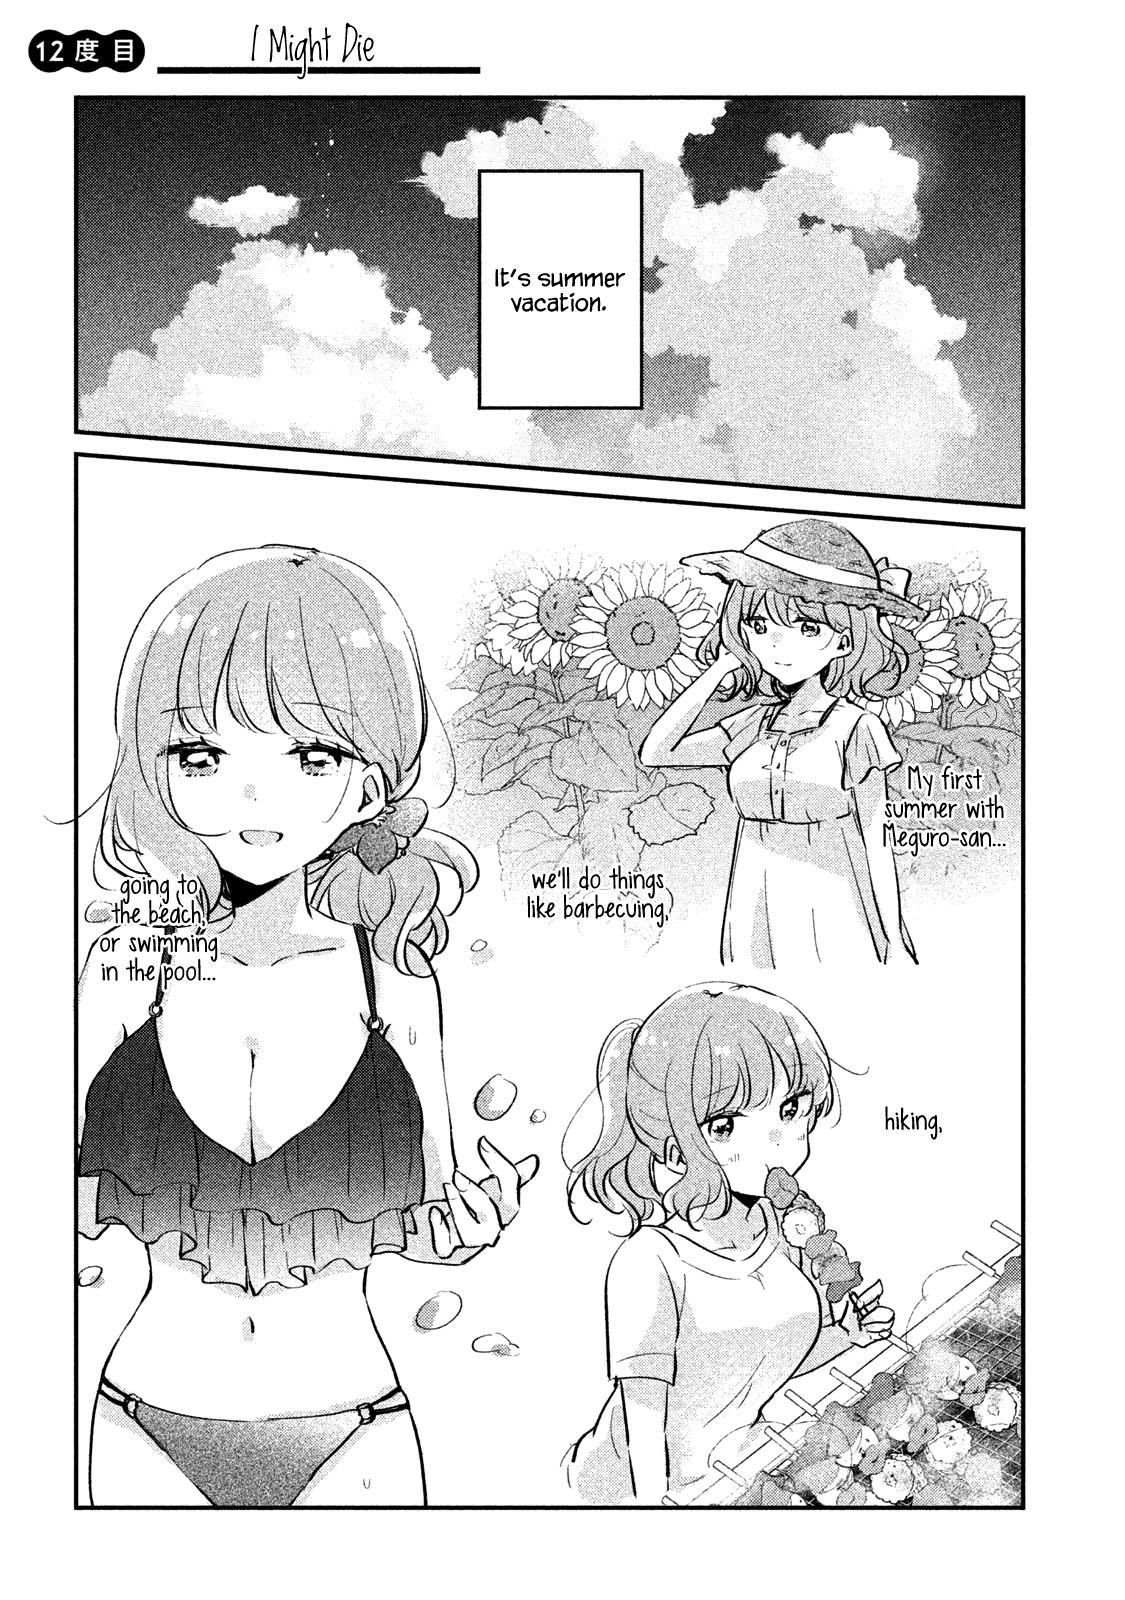 It's Not Meguro-San's First Time Vol.2 Chapter 12: I Might Die - Picture 1